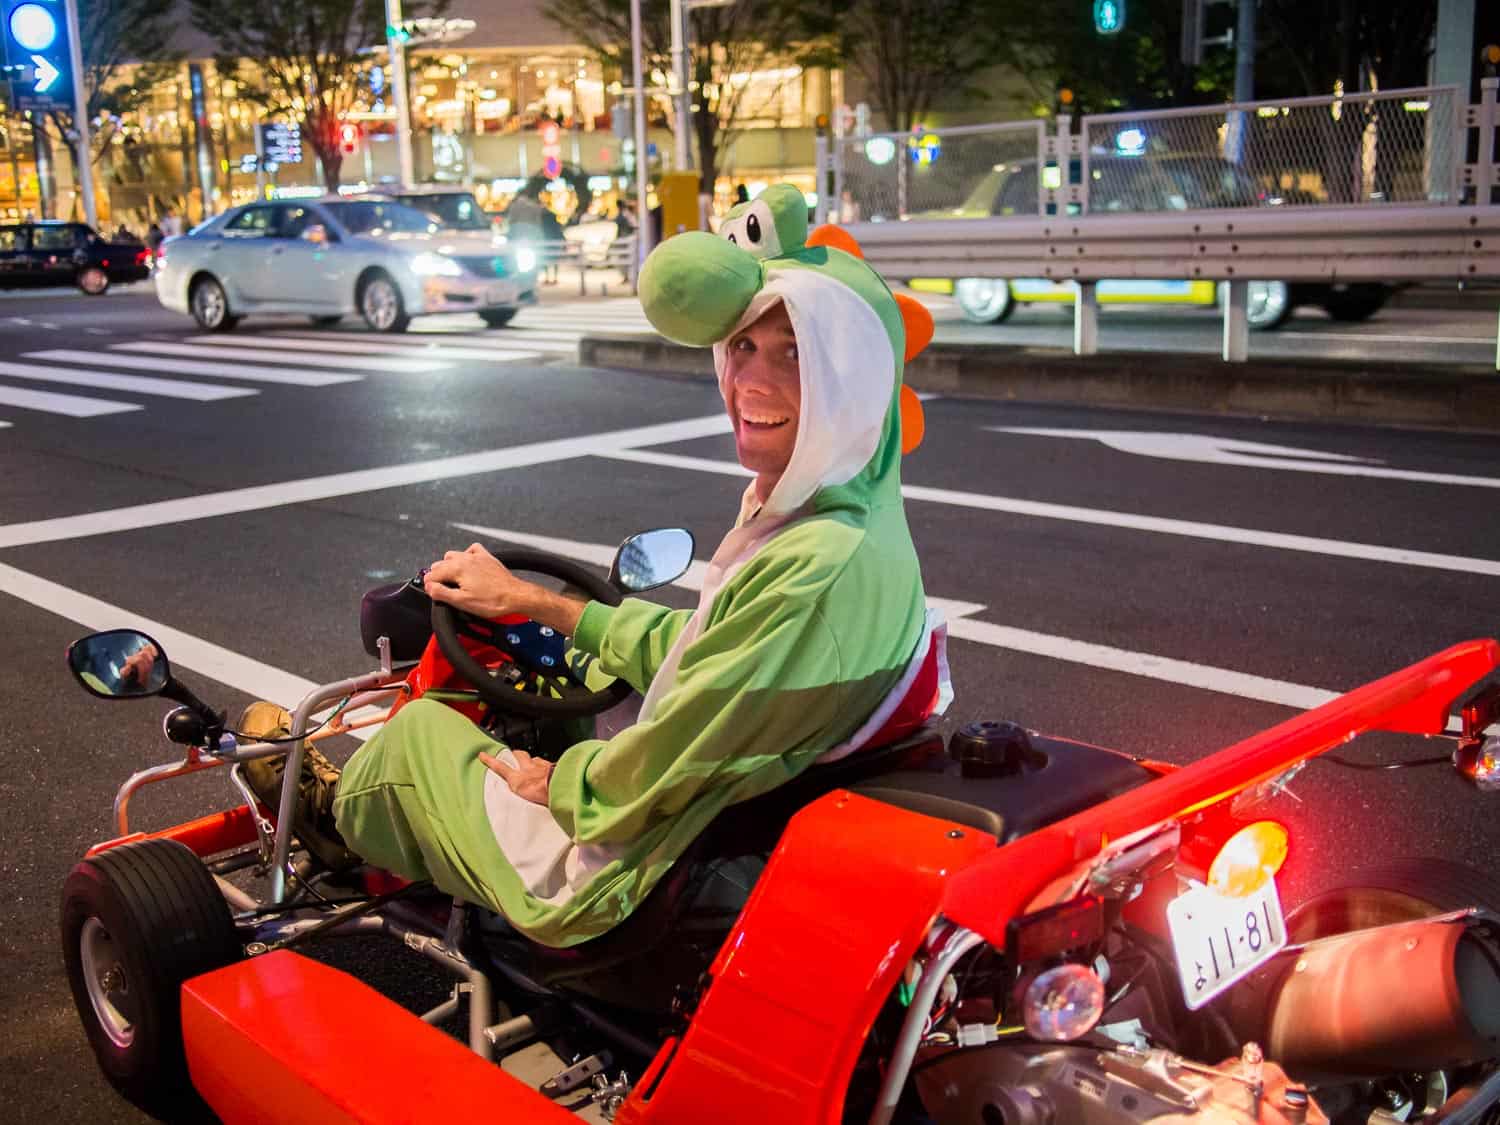 Simon dressed up as Yoshi on our Maricar experience in Tokyo